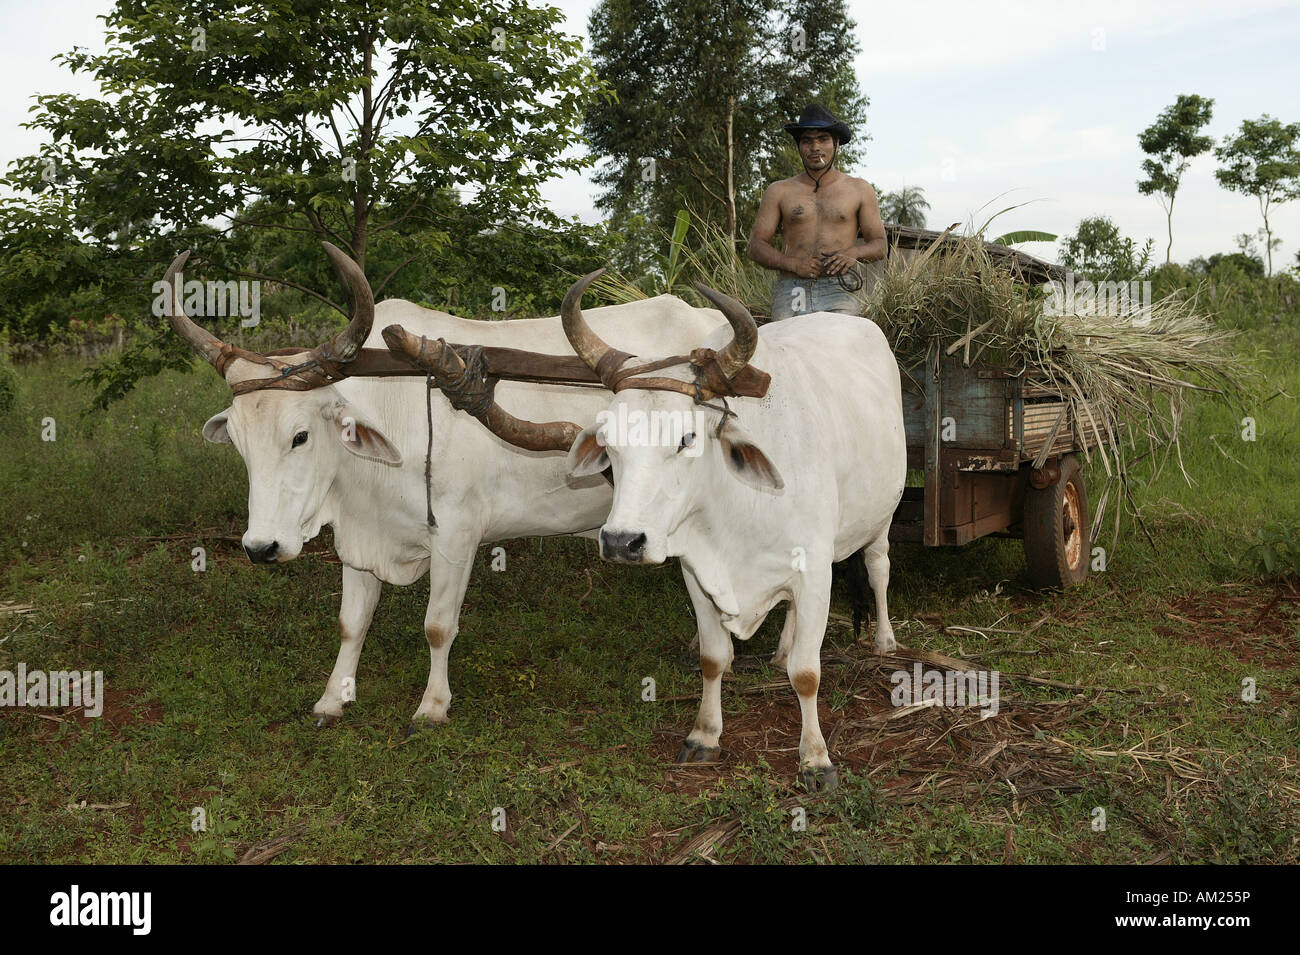 Farm worker with a team of oxen transporting sugarcane, Paraguay, South America Stock Photo